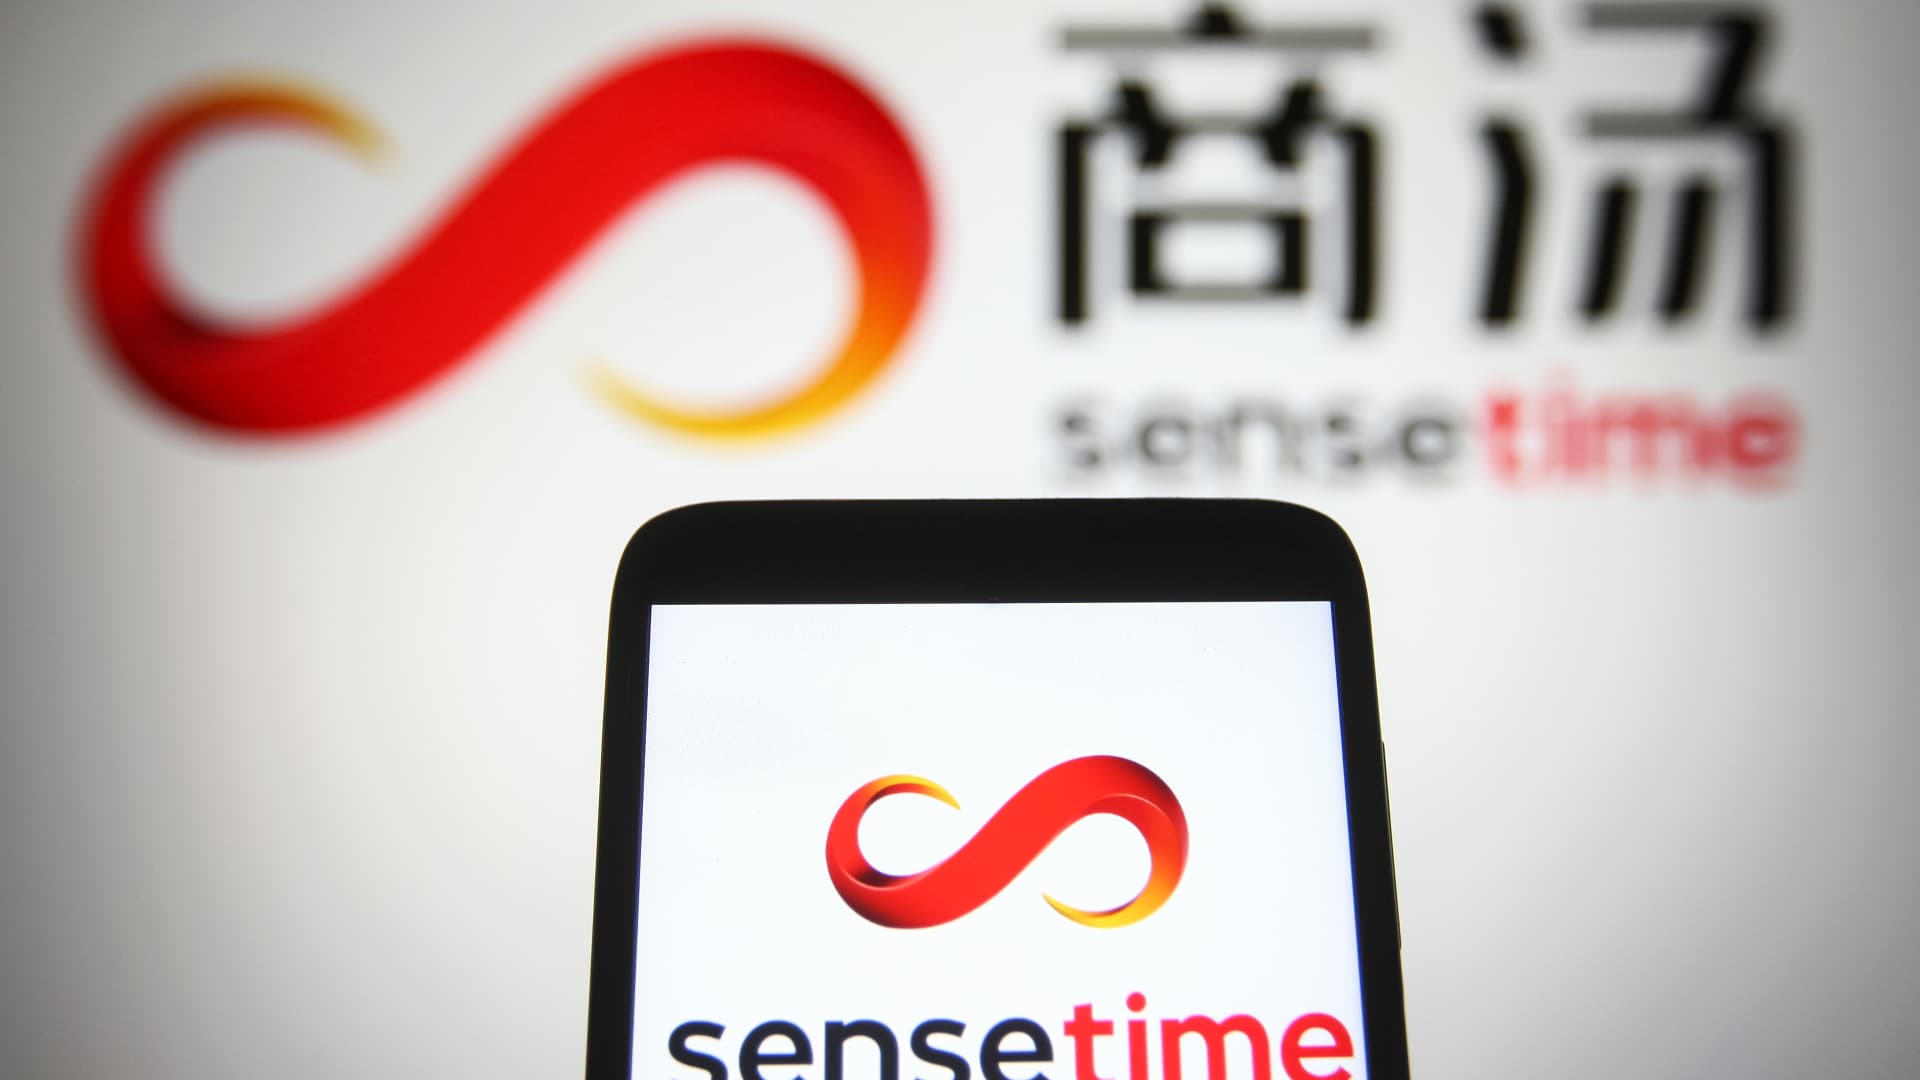 Chinese AI firm SenseTime falls after short seller allegations